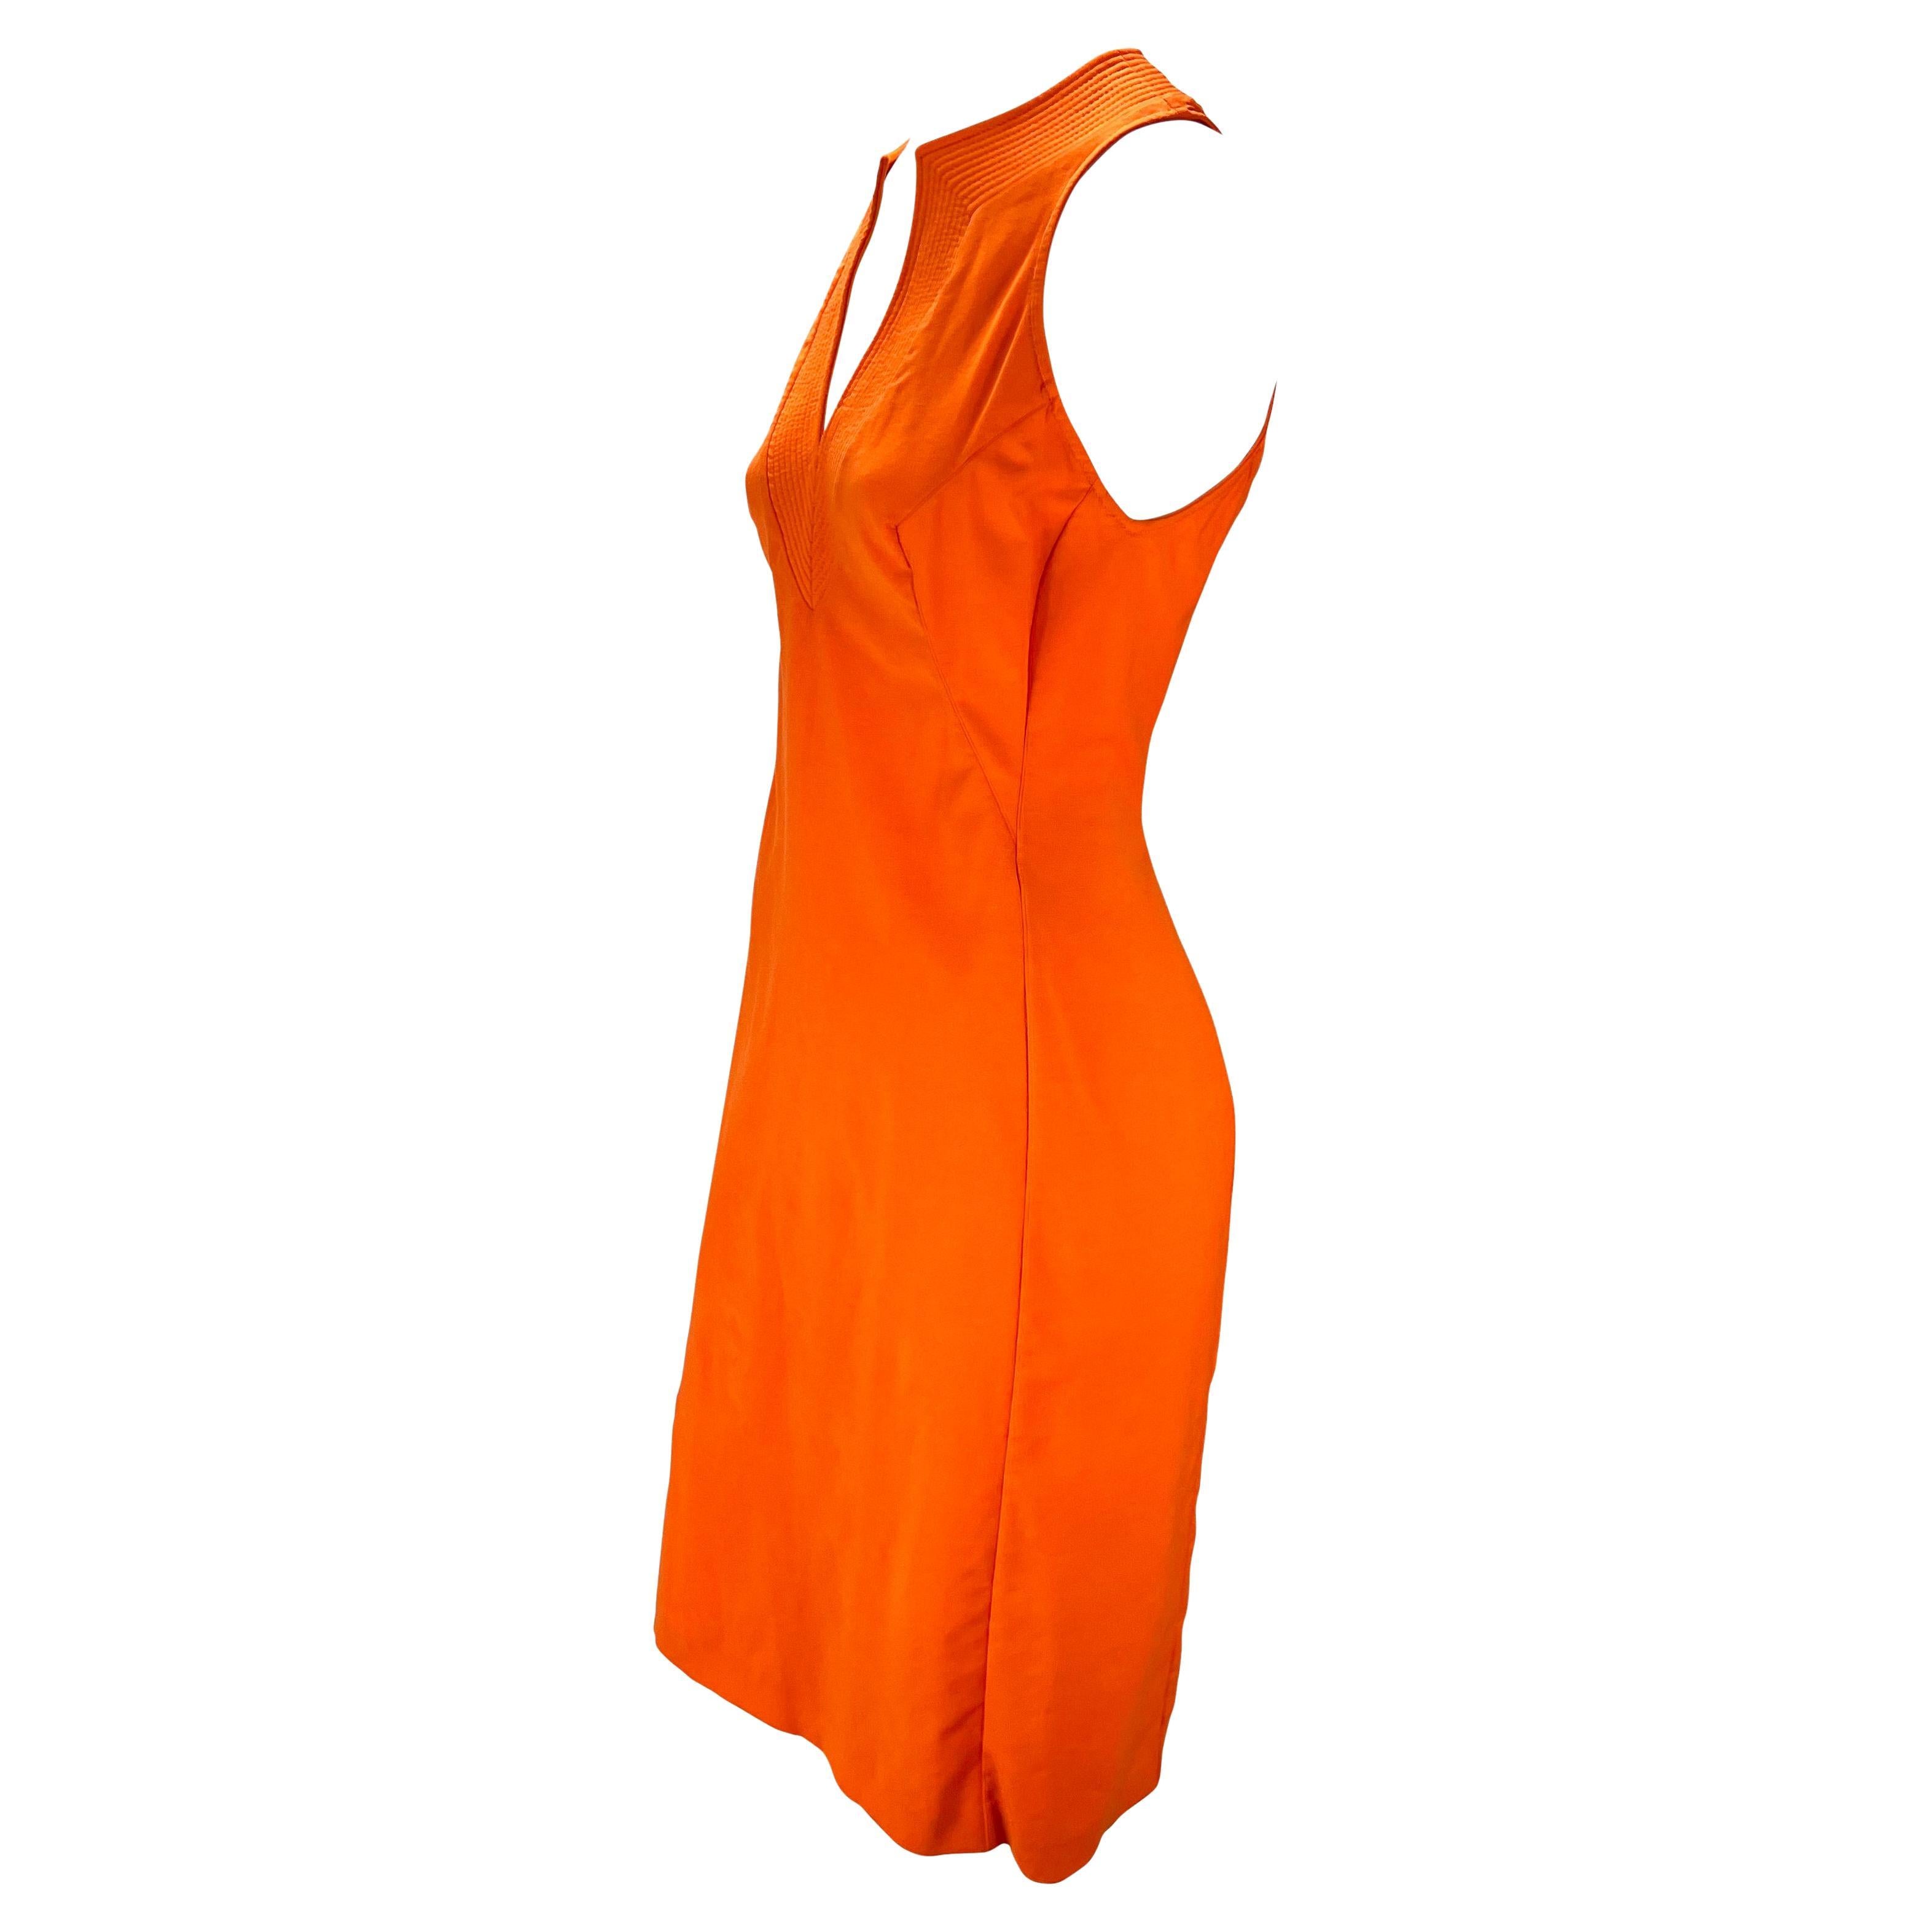 Presenting a stunning bright orange Versace dress, designed by Donatella Versace. From the the early 2000s, this beautiful sleeveless dress features quilting around the deep v-neckline. Lively and effortlessly chic, this dress will become a